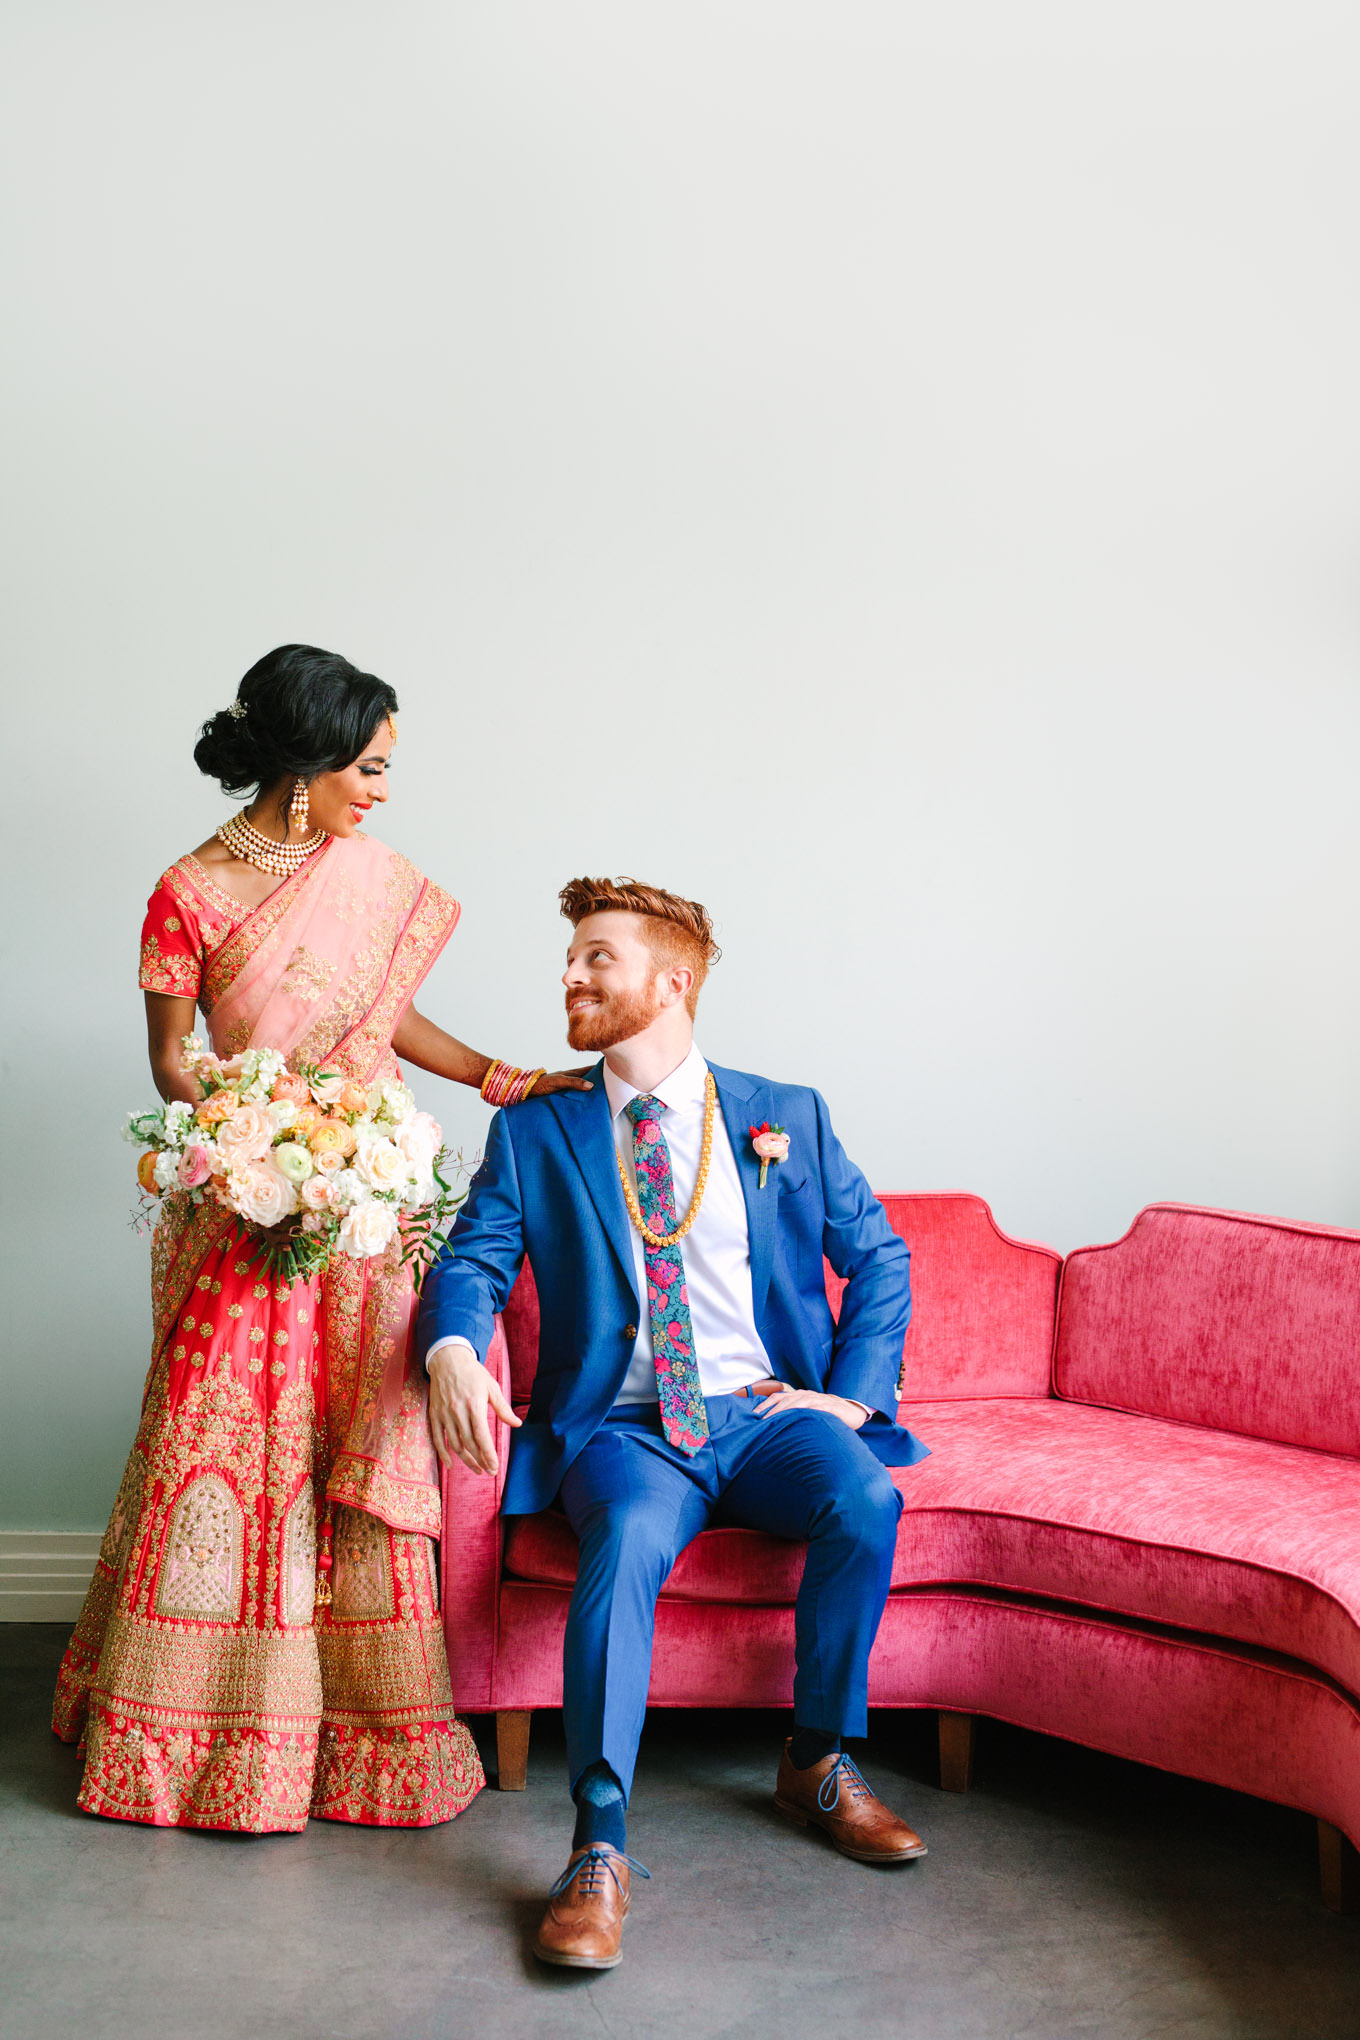 Bride and groom sitting on pink couch. Two Disney artists create a unique and colorful Indian Fusion wedding at The Fig House Los Angeles, featured on Green Wedding Shoes. | Colorful and elevated wedding inspiration for fun-loving couples in Southern California | #indianwedding #indianfusionwedding #thefighouse #losangeleswedding   Source: Mary Costa Photography | Los Angeles